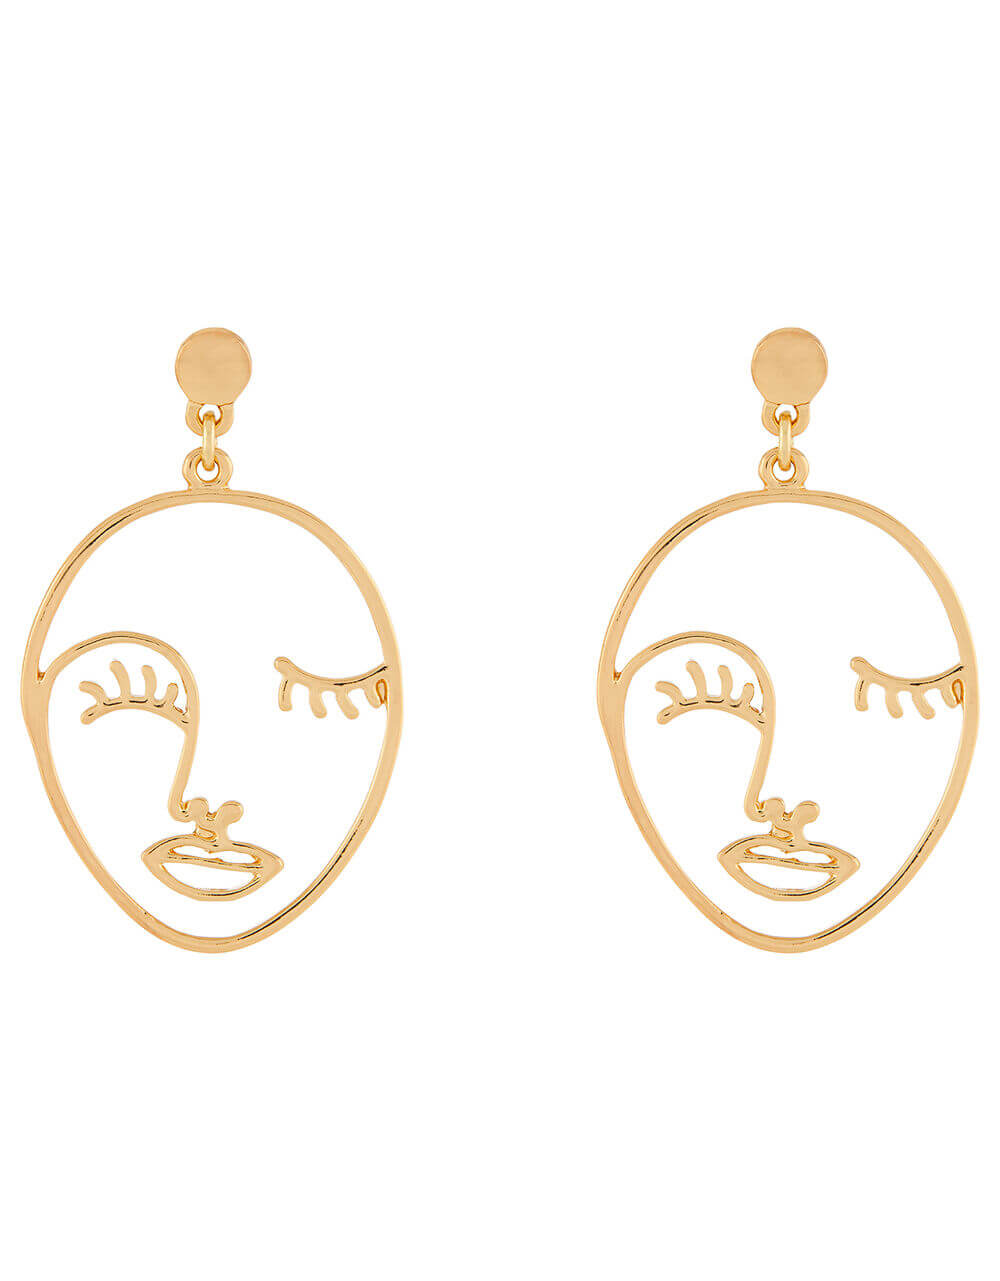 Accessorize Gold Face Earrings